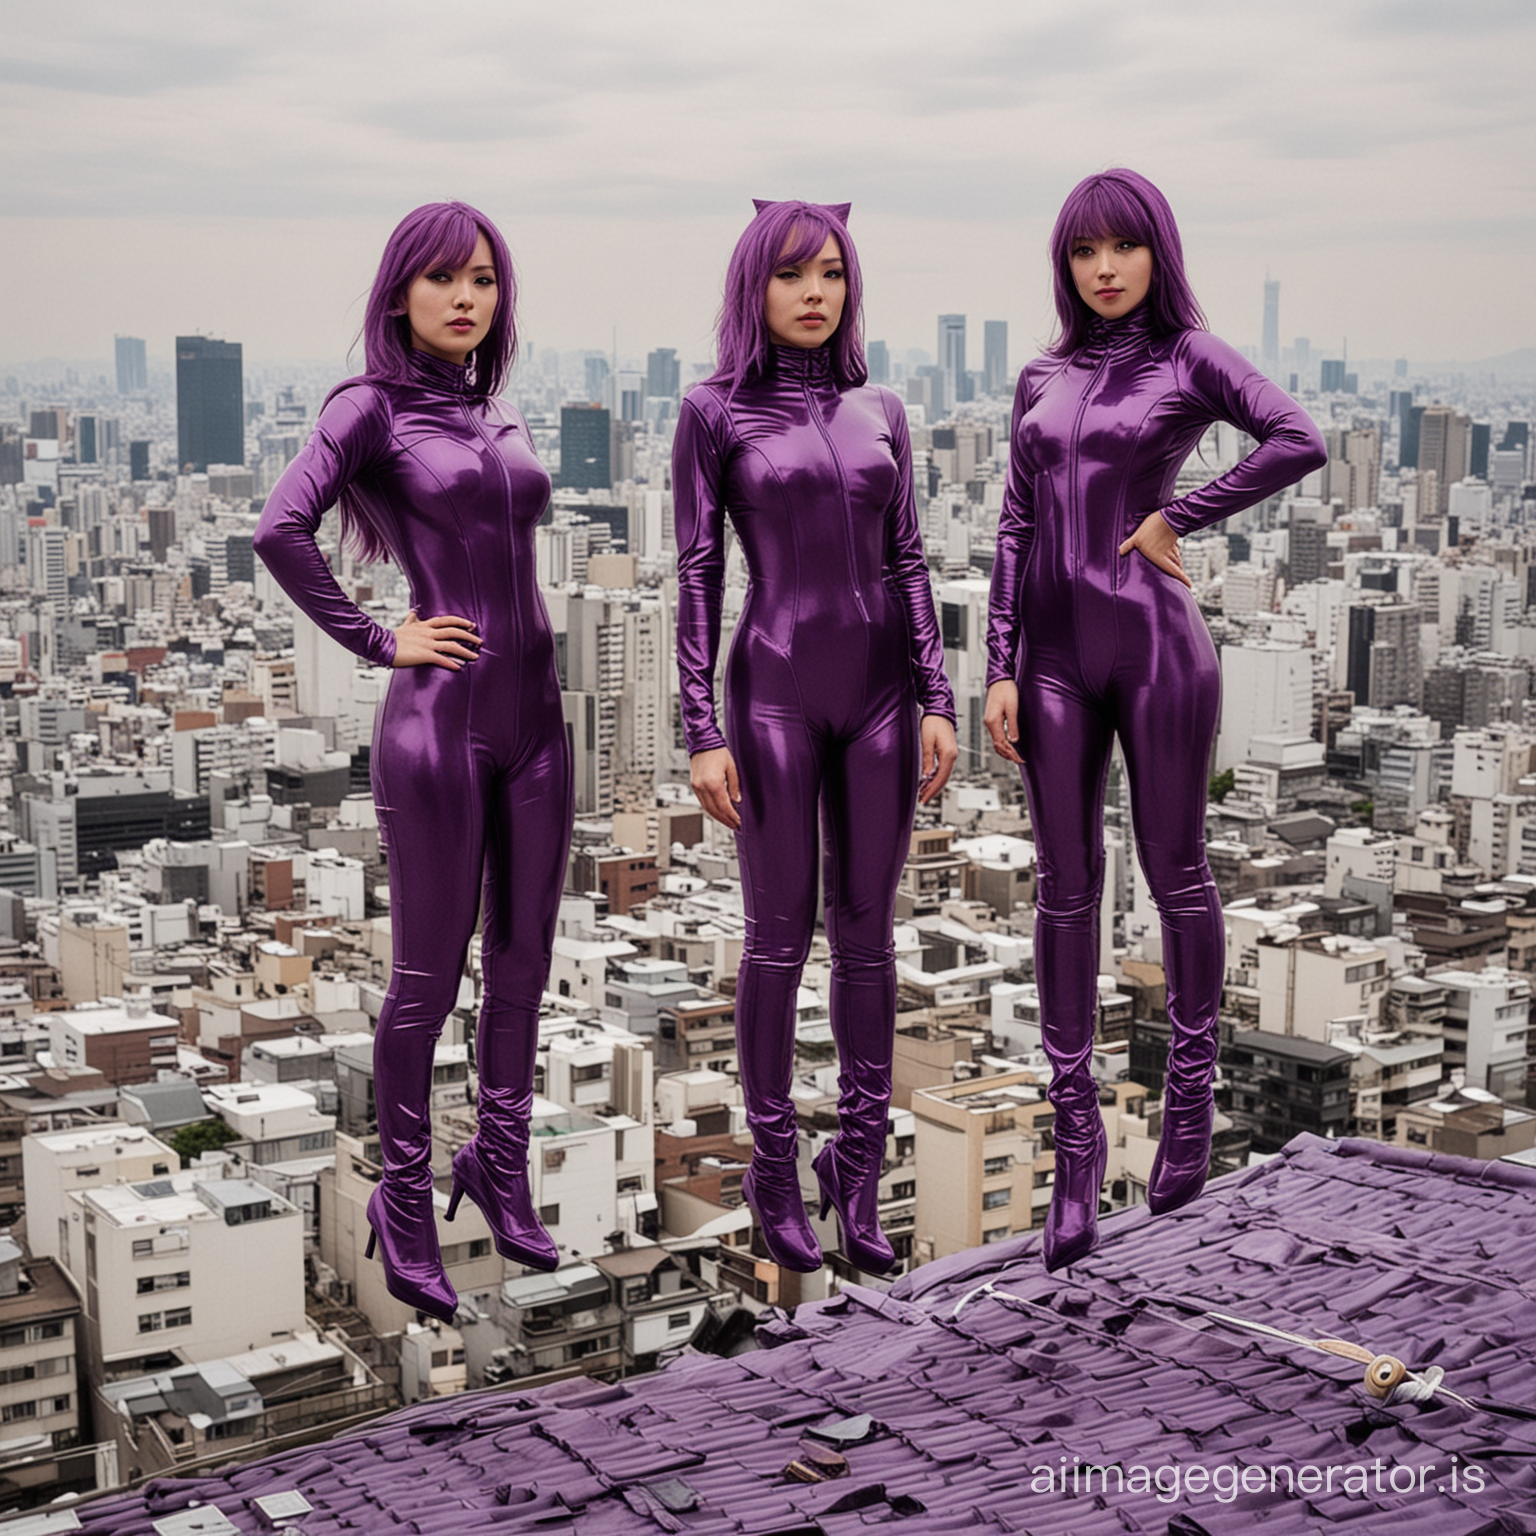 3 superheroin with purple catsuits jumping on the roof of tokyo buildings